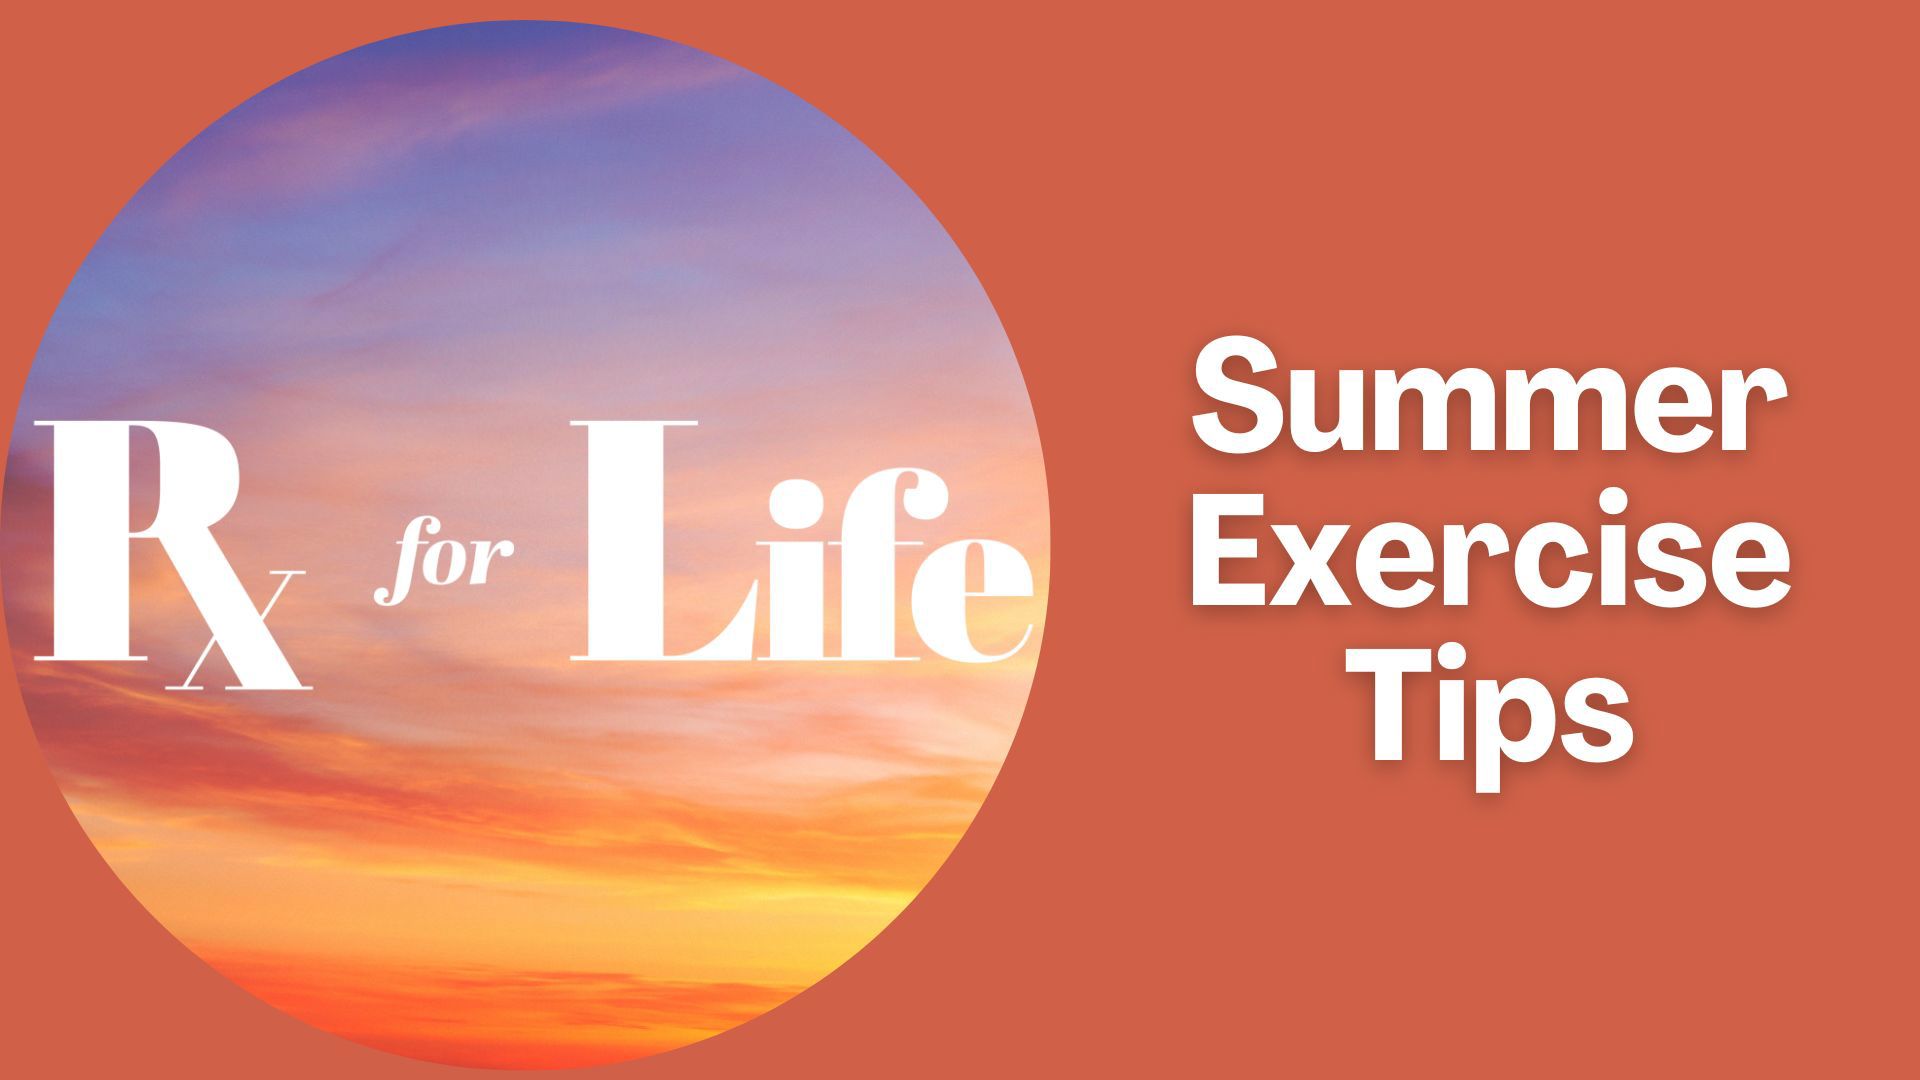 Monica Robins talks with a doctor on how to exercise safely during the summer heat. How to avoid stress on the heart and the signs of heat exhaustion and illness.